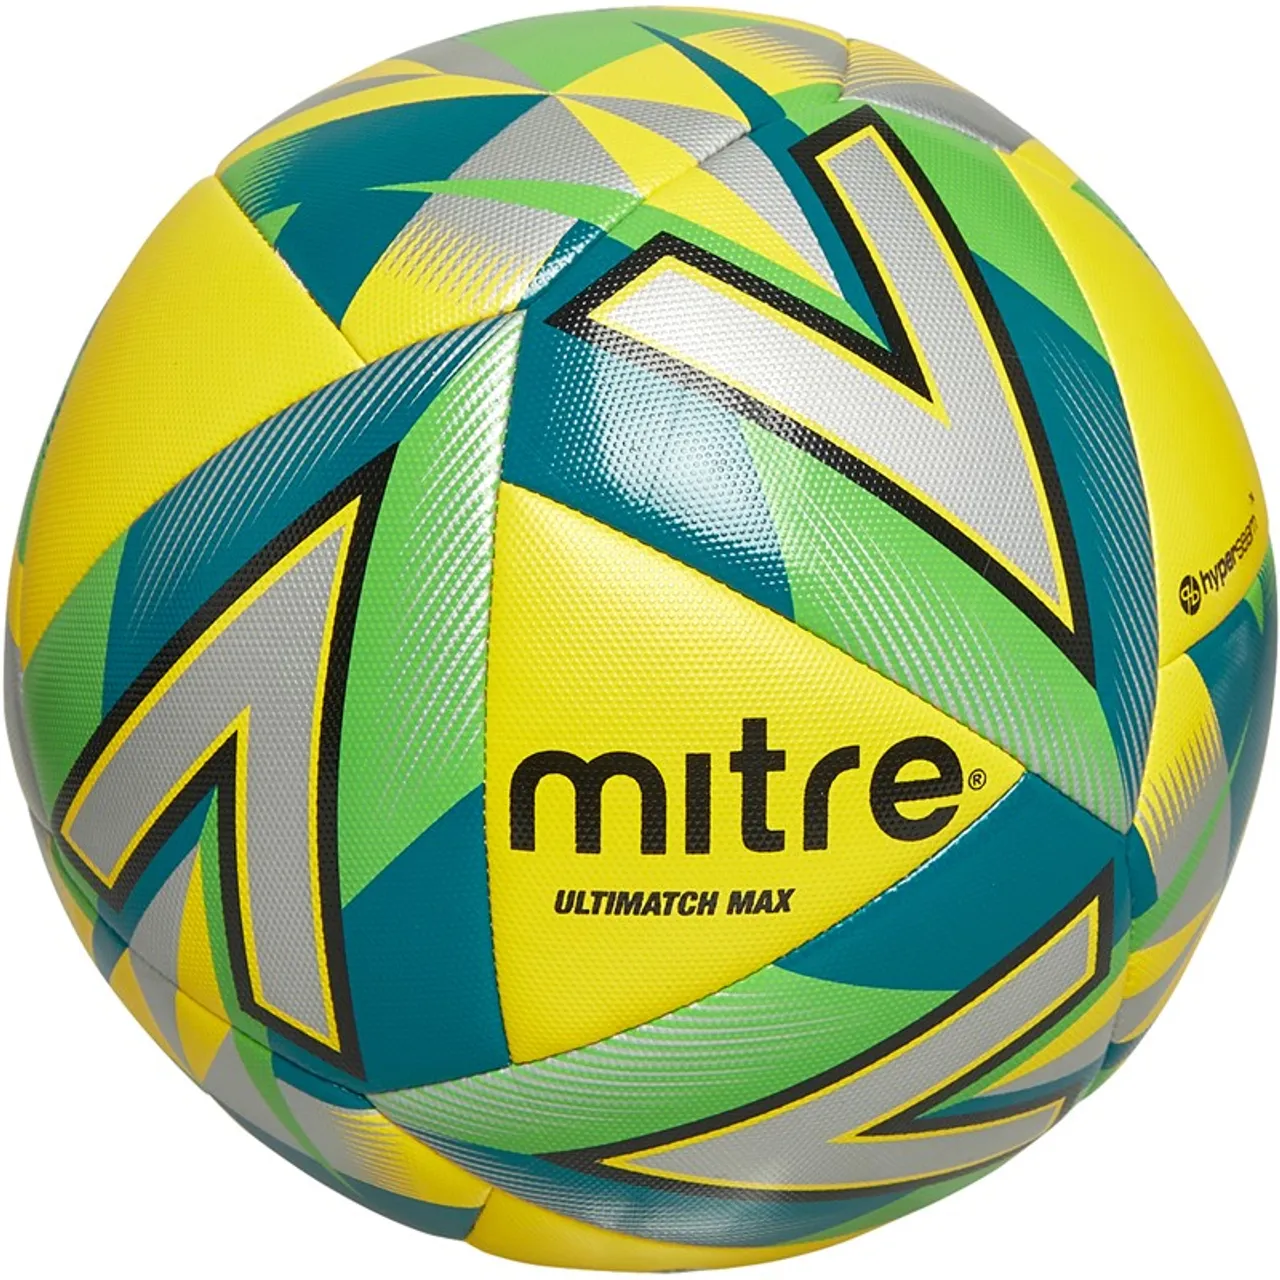 Mitre Ultimatch Max Match Football (FIFA Quality Certified) Yellow/Silver/Dark Green/Black